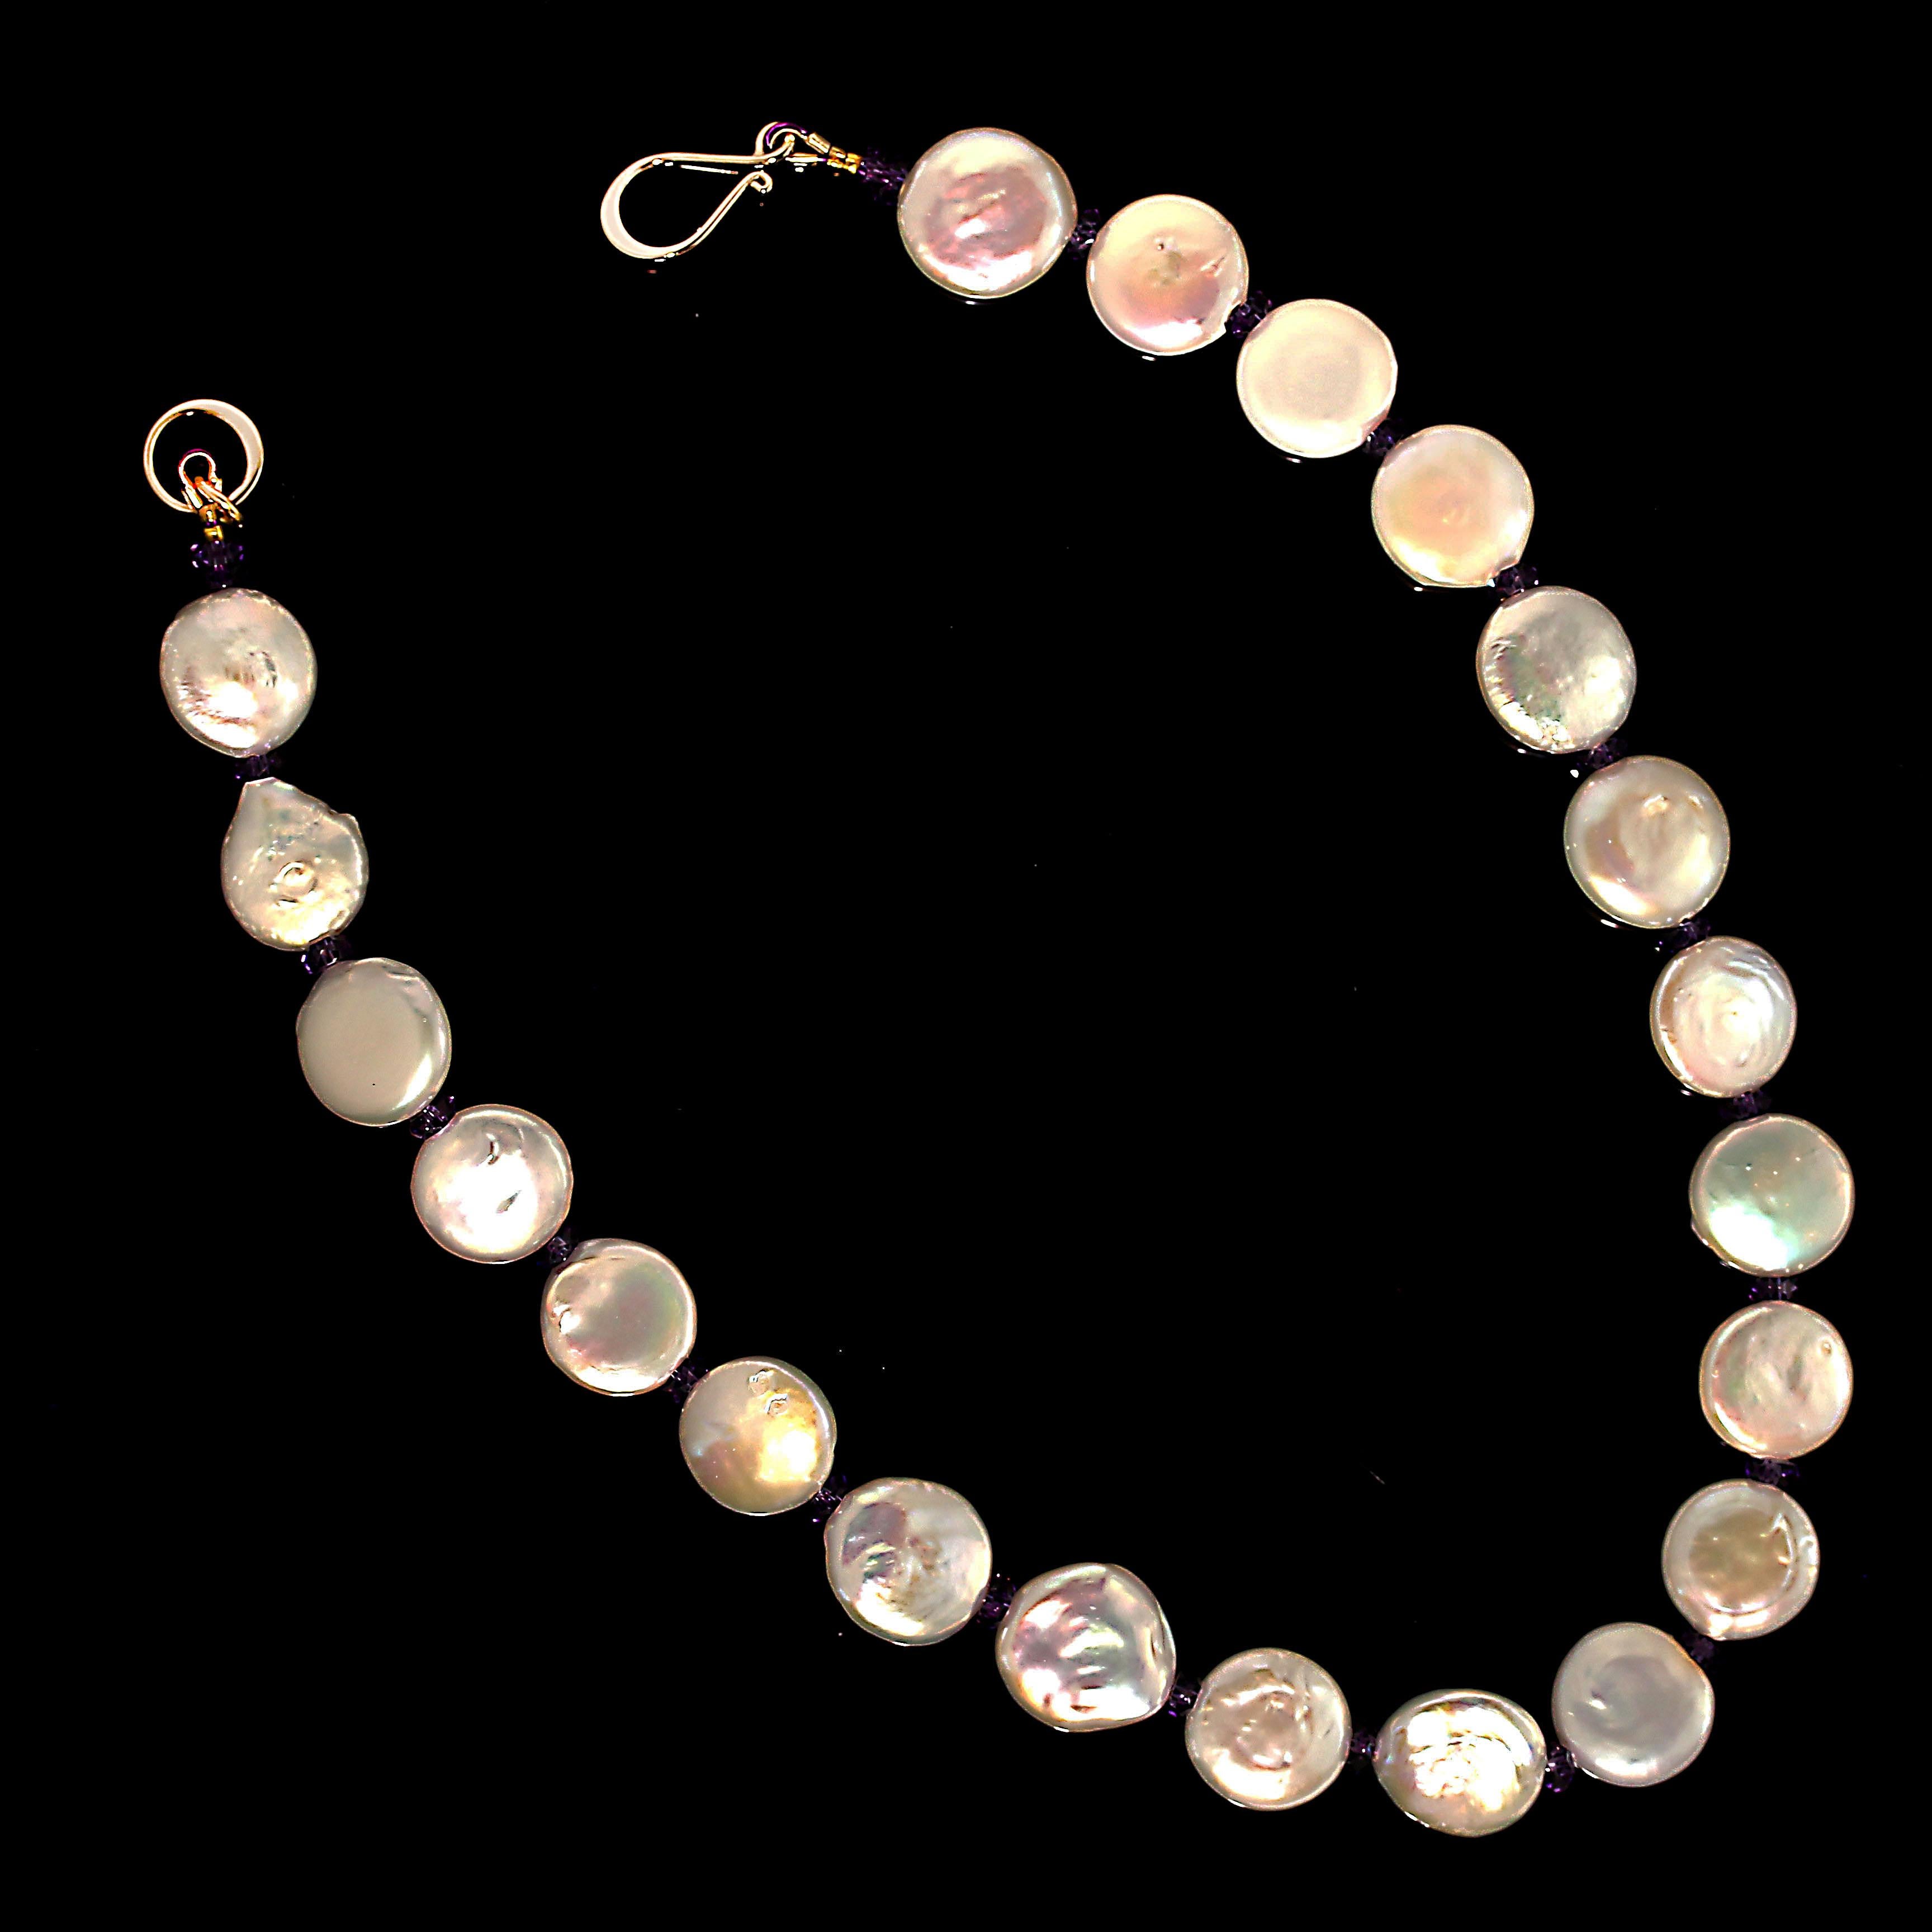 glowing pearl necklace